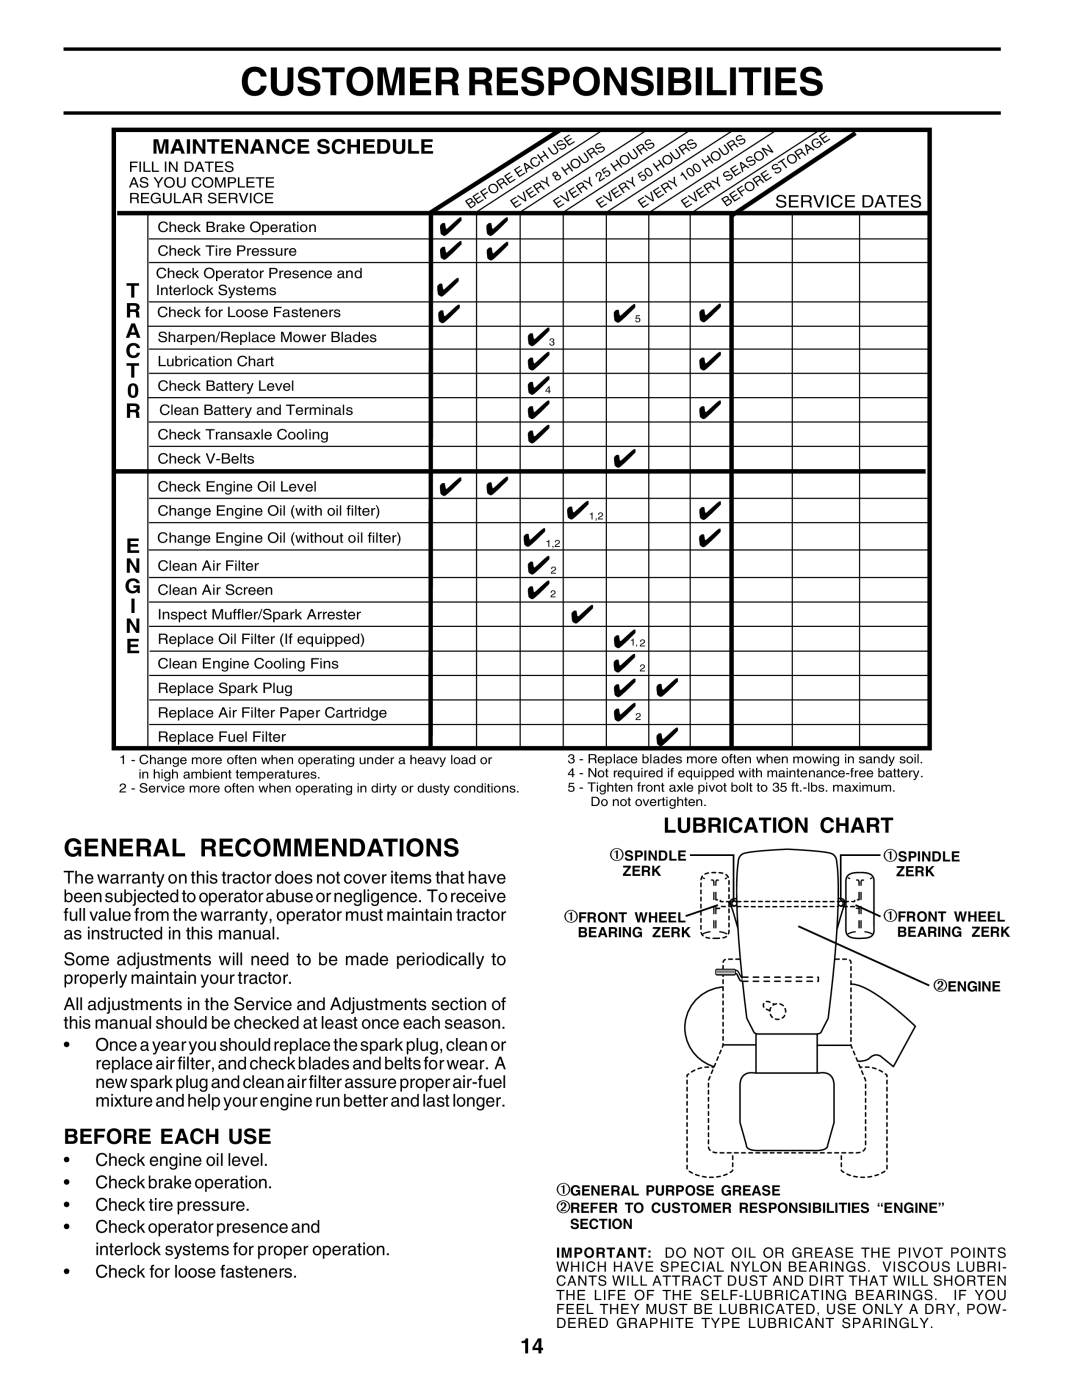 Poulan 183313 Customer Responsibilities, General Recommendations, Before Each Use, Lubrication Chart, Maintenance Schedule 